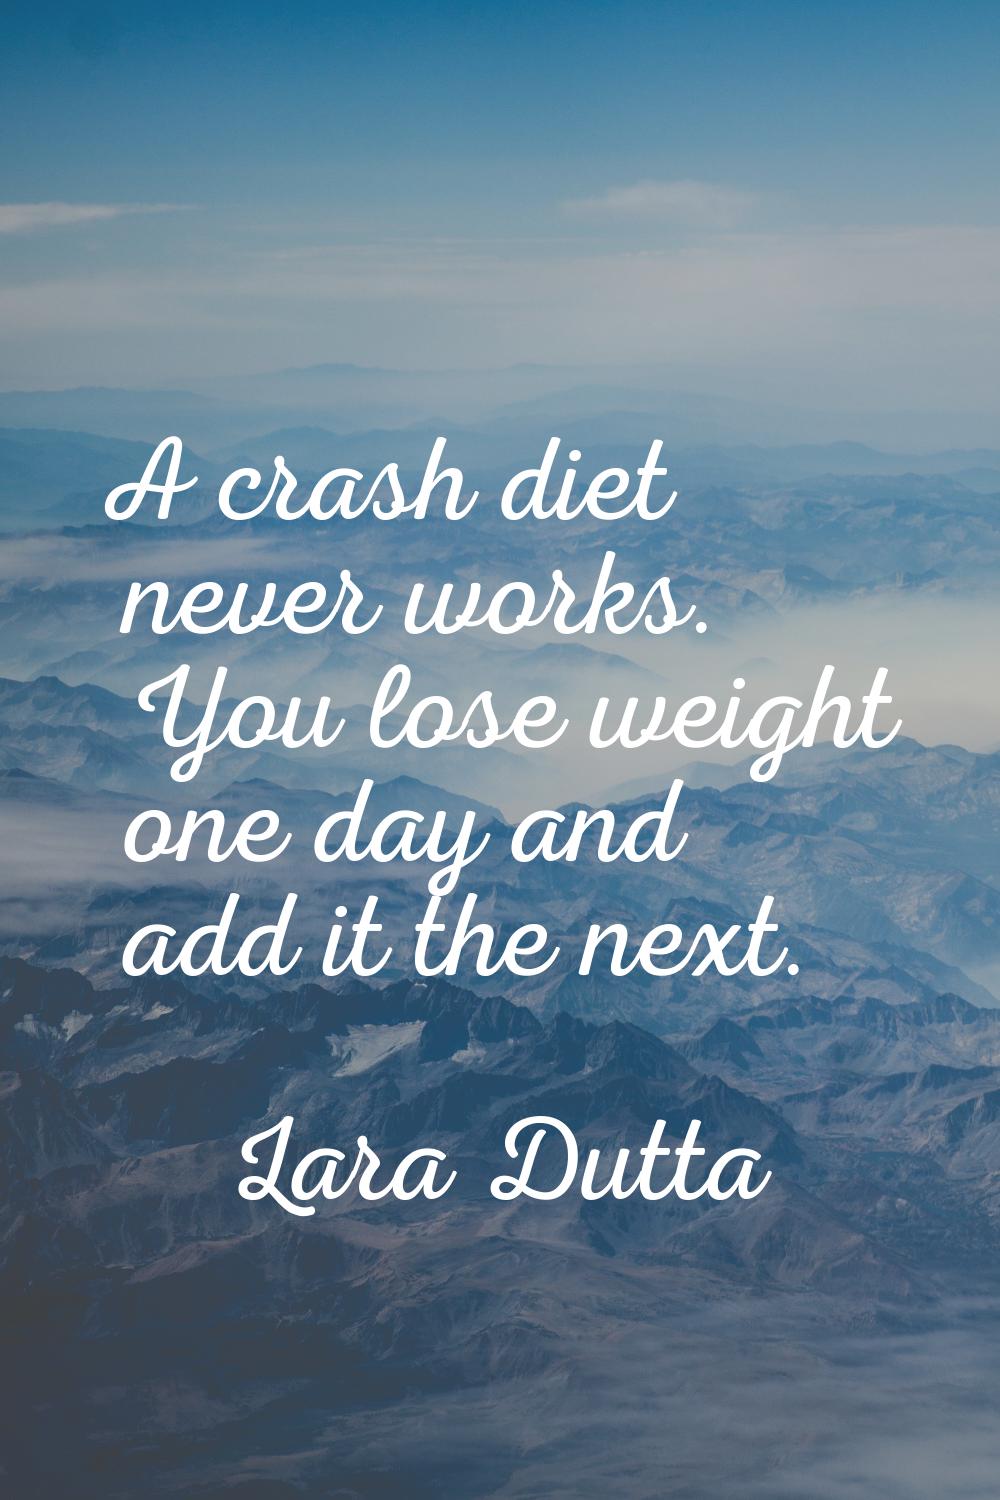 A crash diet never works. You lose weight one day and add it the next.